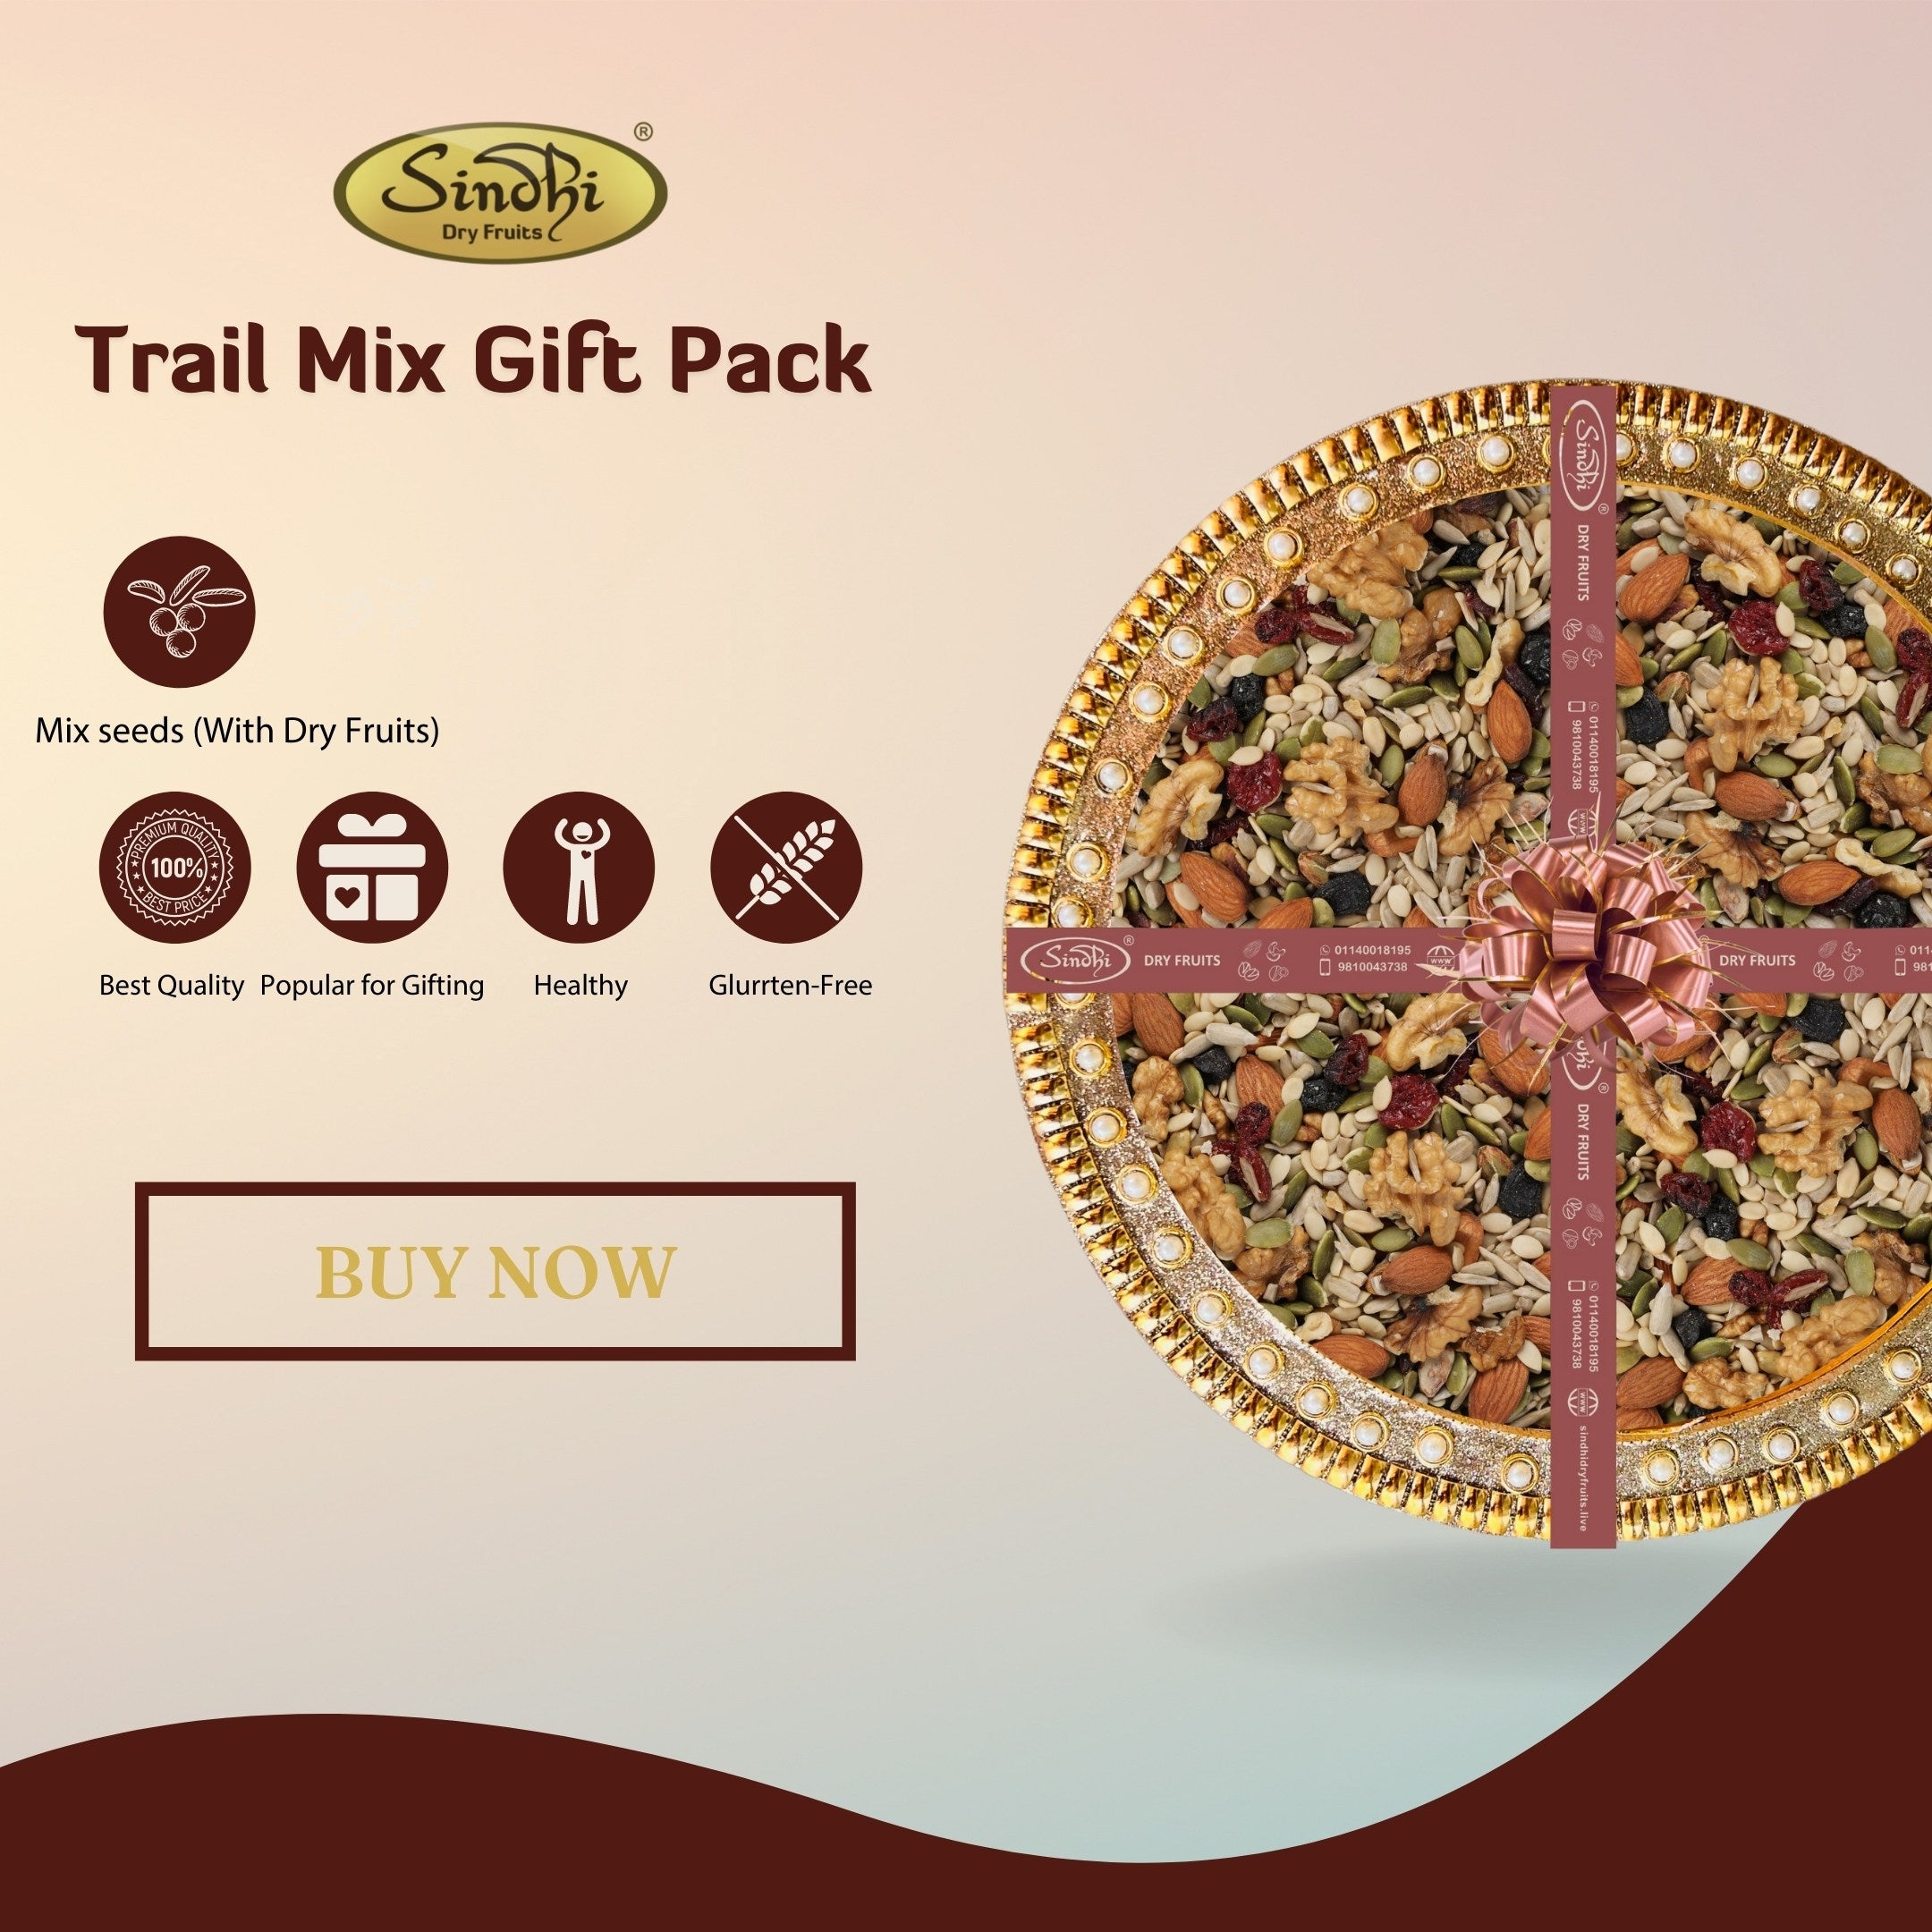 Gift Pack Containing Trail Mix with Dry Fruits - Sindhi Dry Fruits